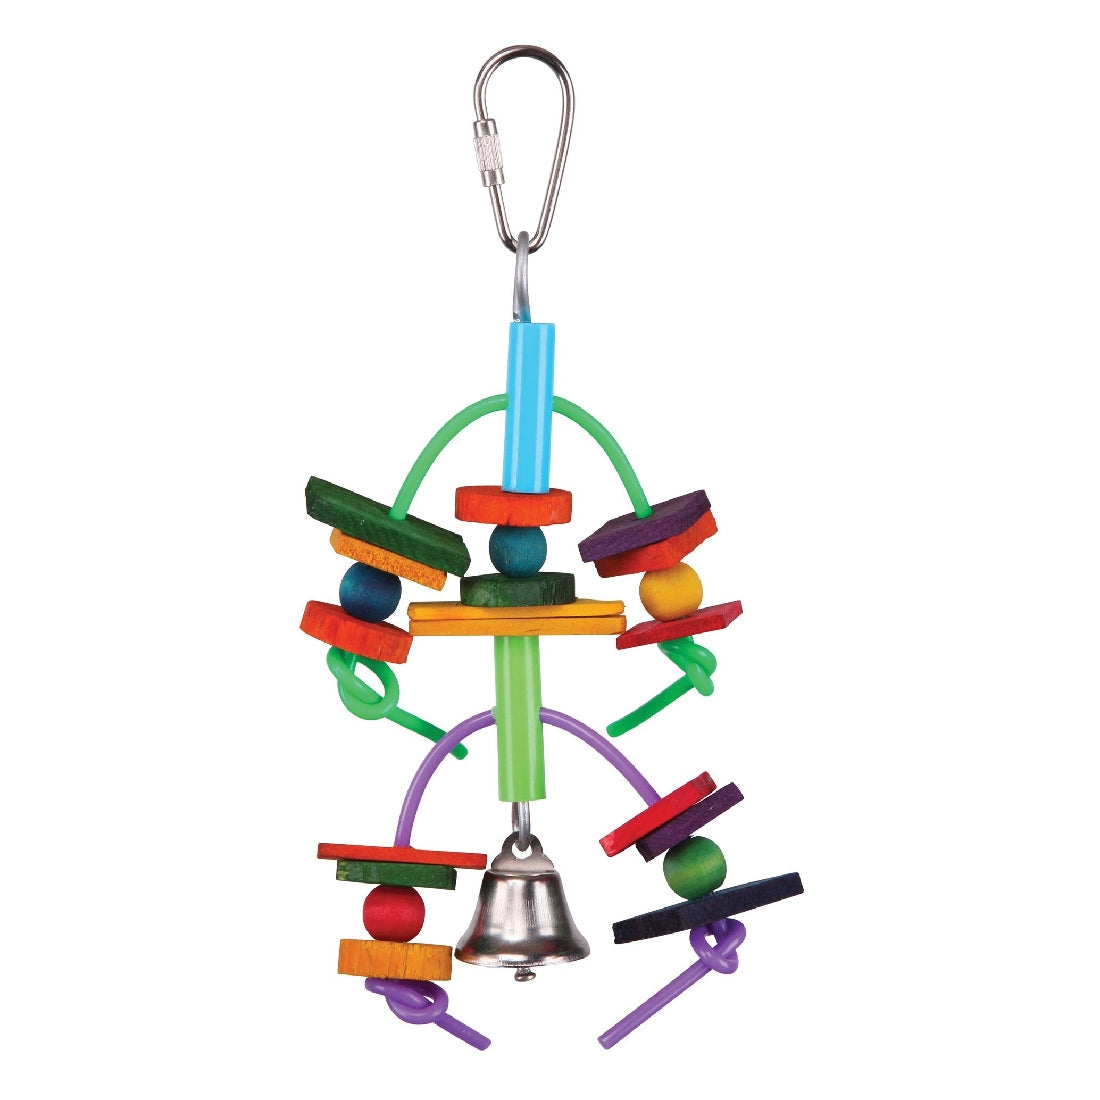 Colorful bird toy with beads, blocks, and bell on white background.